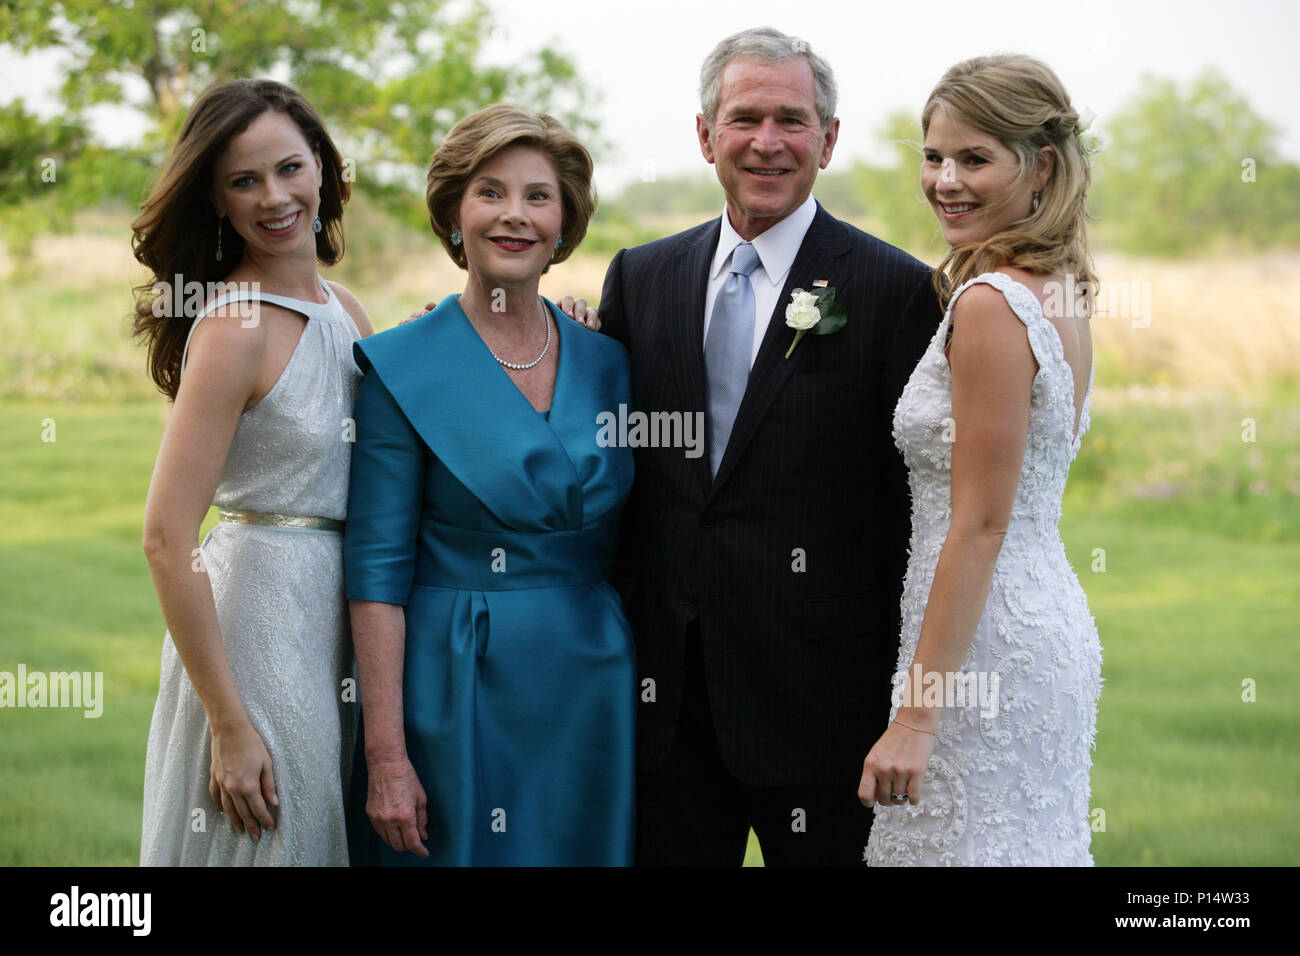 President and Mrs. Bush pose with their daughters Barbara and Jenna. President George W. Bush and Mrs. Laura Bush pose with daughters Jenna and Barbara Saturday, May 10, 2008, at Prairie Chapel Ranch in Crawford, Texas, prior to the wedding of Jenna and Henry Hager. Stock Photo